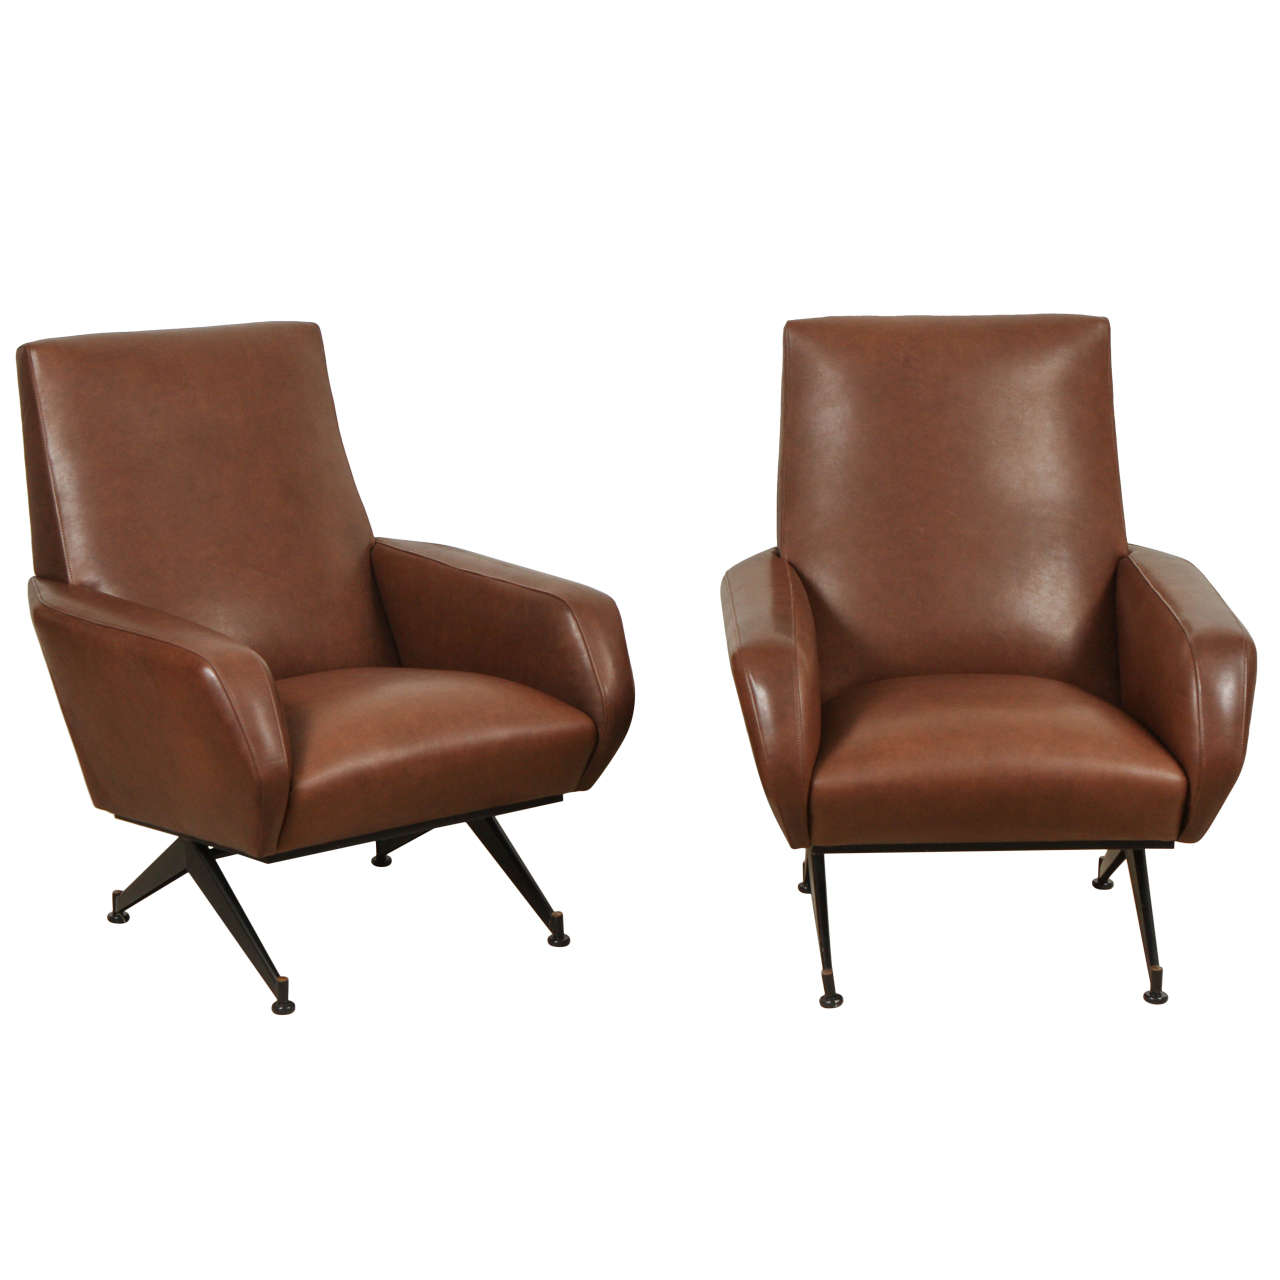 Pair of Italian Leather Chairs in the Style of Arflex